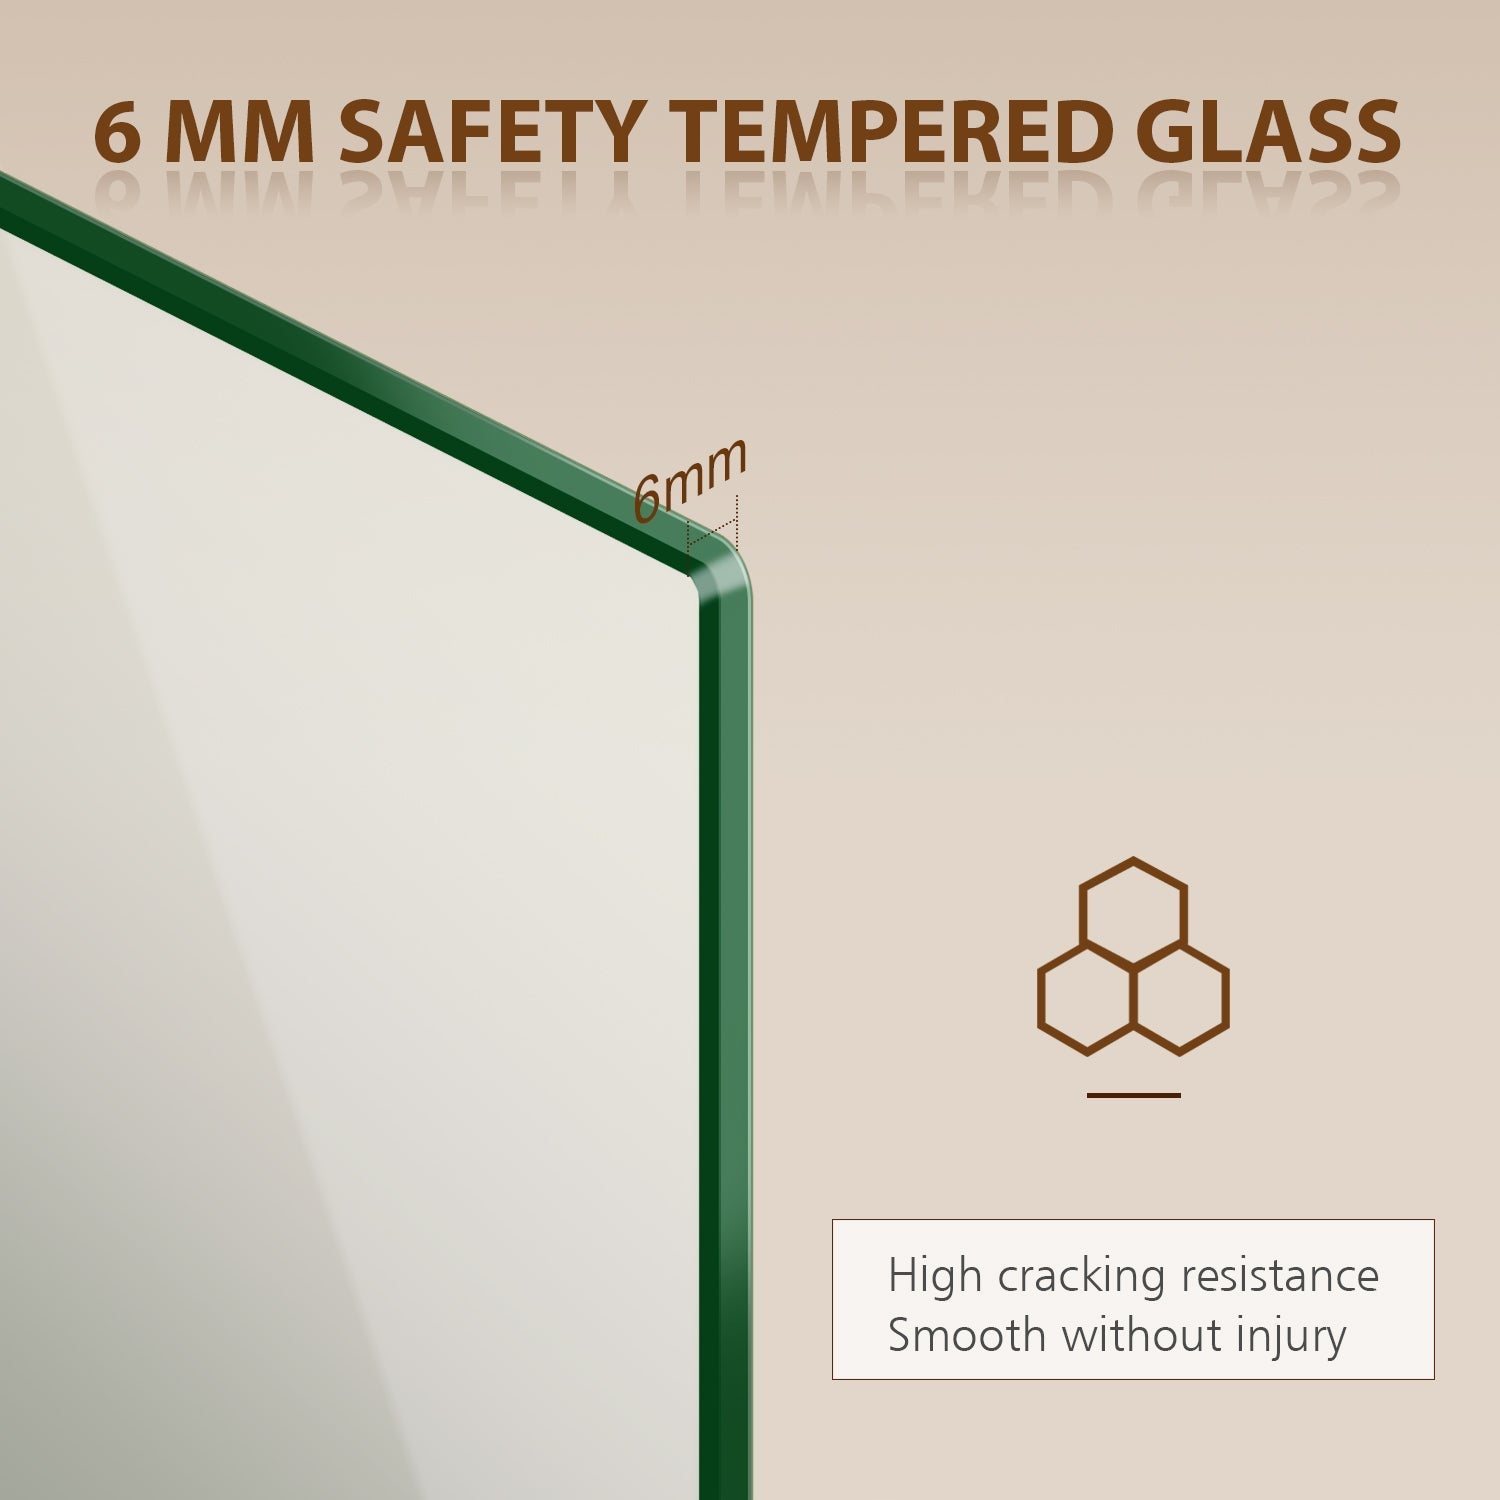 1/4 inch (6mm) thick glass- ANSI Z97.1 certified, not shatter and easy to clean, you can get on with your showering comfortably and safely. All the edges are curved for safety